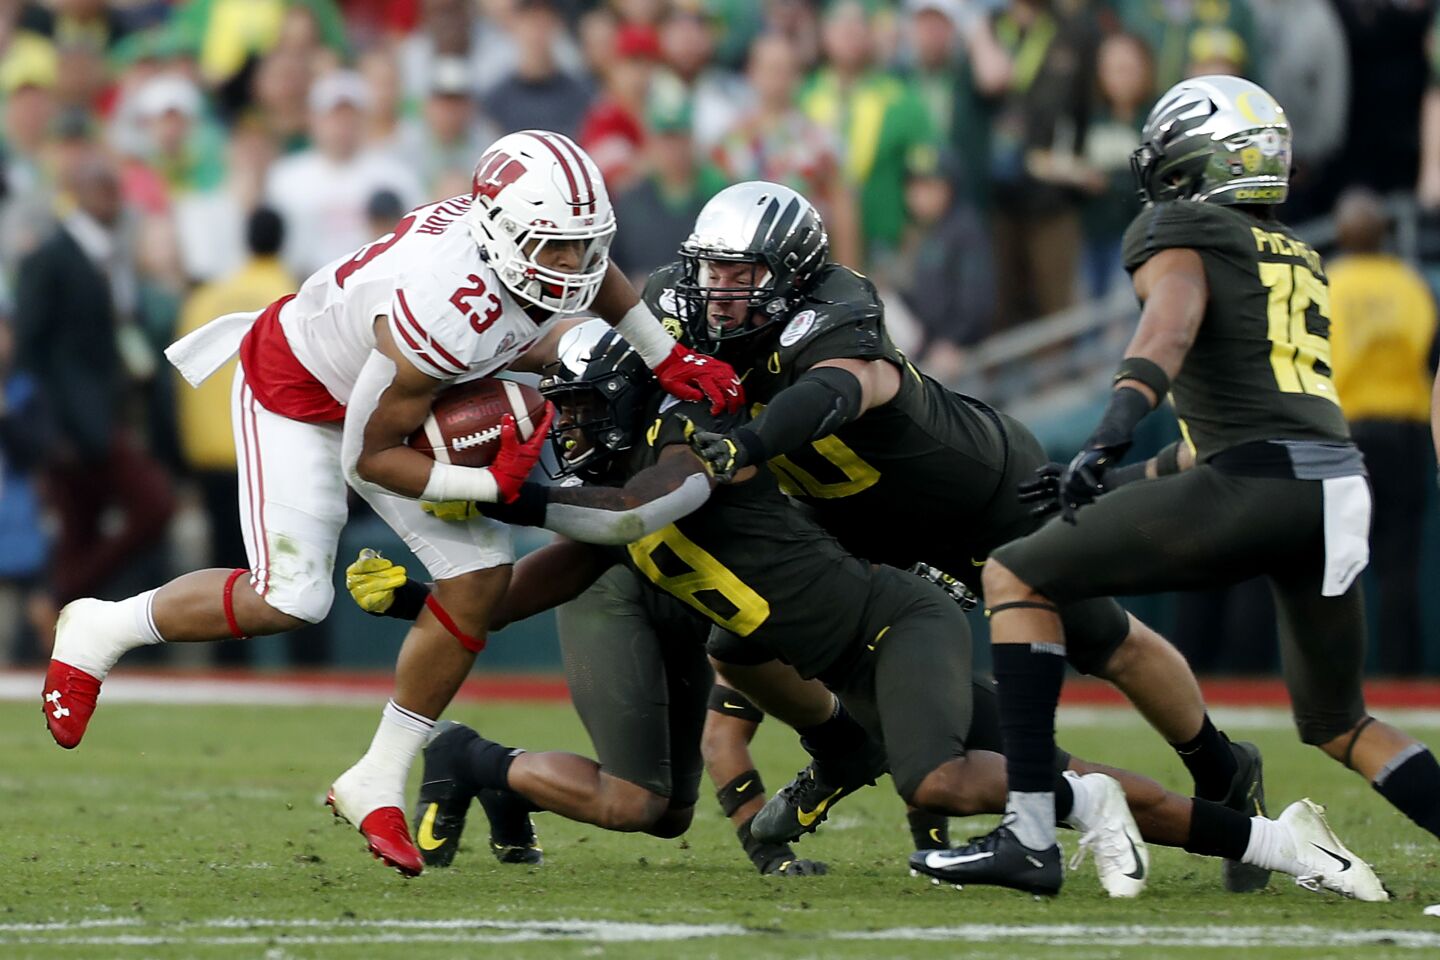 The Oregon defense swarms around Wisconsin running back Jonathan Taylor during the third quarter.